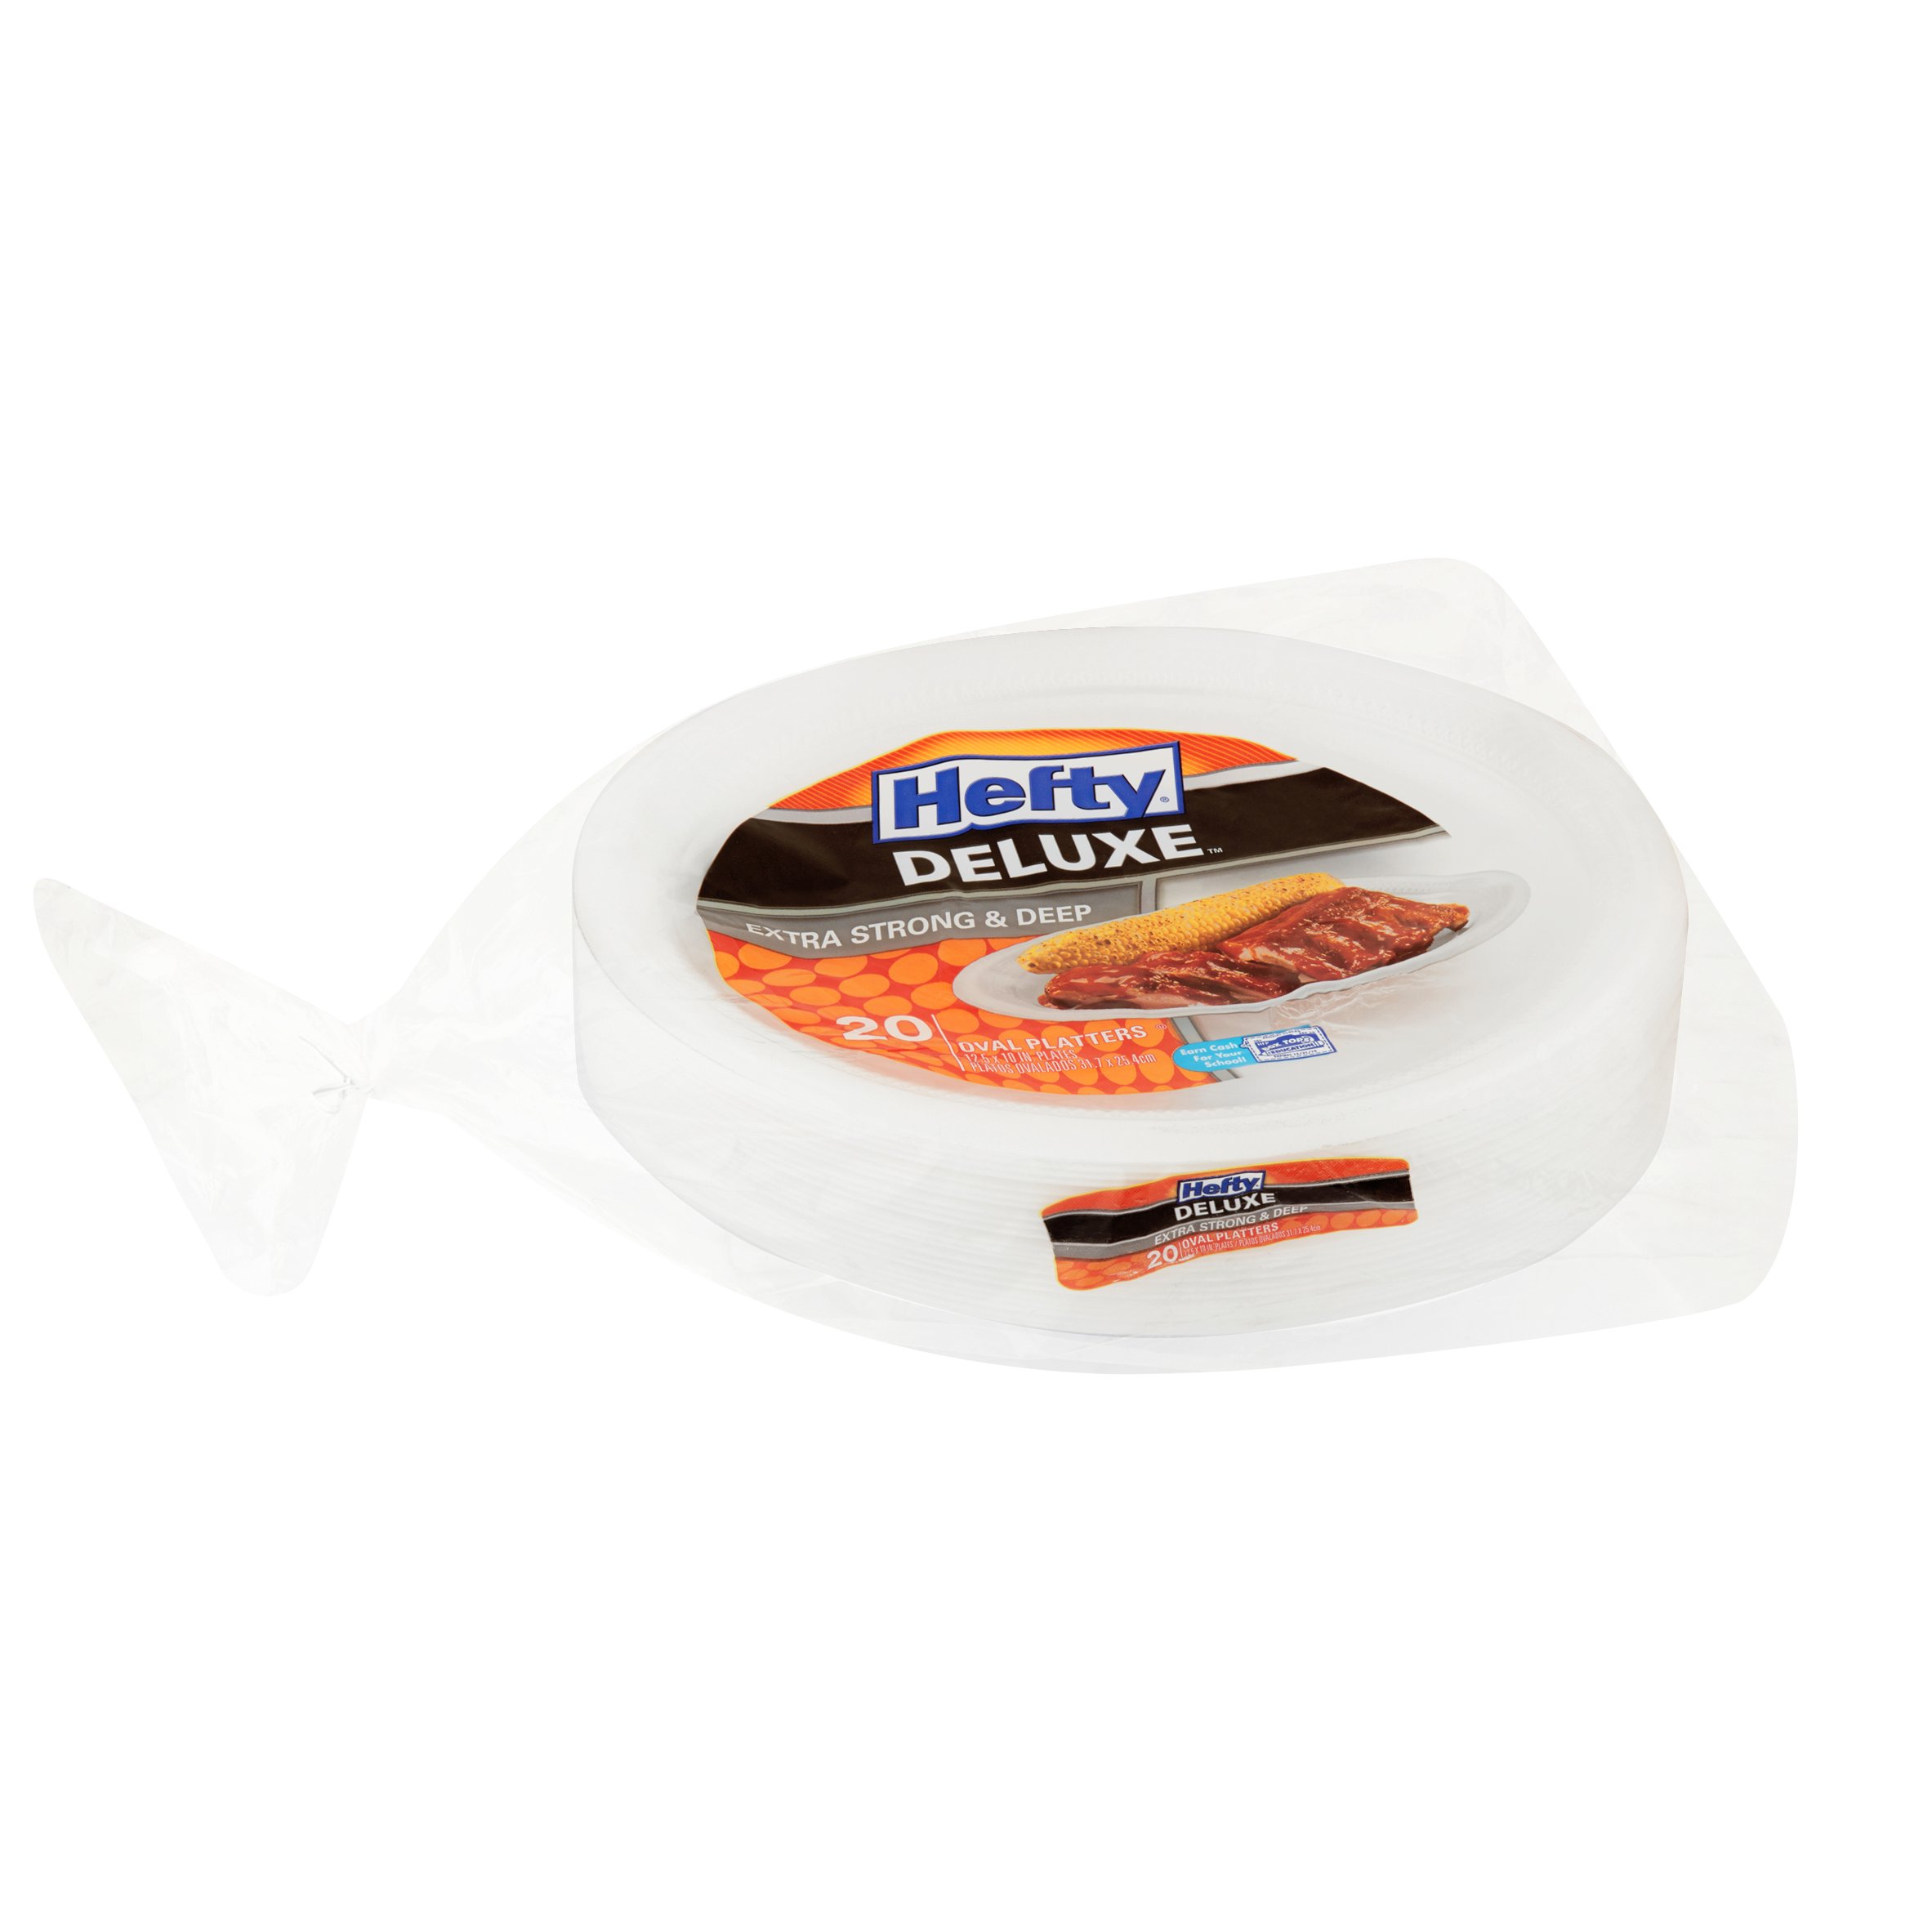 Hefty Deluxe Extra Strong & Deep Foam Platters, Oval, White, 10x12 Inch, 20 Count - image 2 of 5